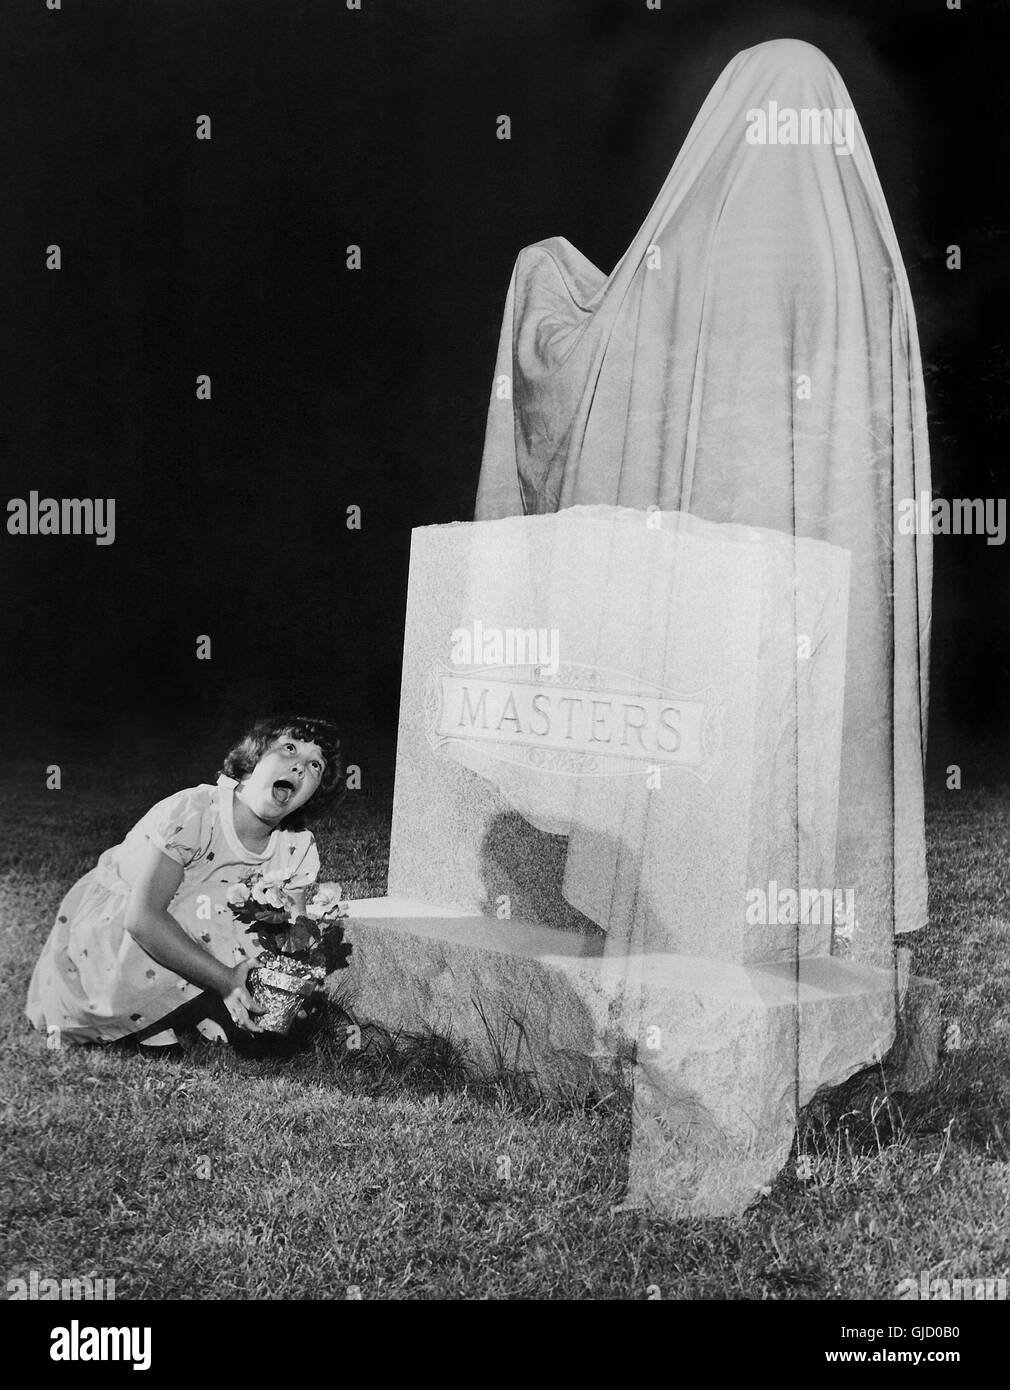 A girl placing flowers at a cemetery grave is surprised by a ghost in this 1960s nighttime photograph created by making a double exposure on the same film frame. The photographer figured a flash exposure setting for the girl and gravestone, and set the lens opening (f/stop) at one-half of that exposure. While the girl held still, a person in a white sheet posed in front of the gravestone and a 2nd flash exposure was made at the same f/stop. Those two half exposures produced a proper exposure. What was recorded during the 1st exposure became visible behind the sheet to create the ghost effect. Stock Photo